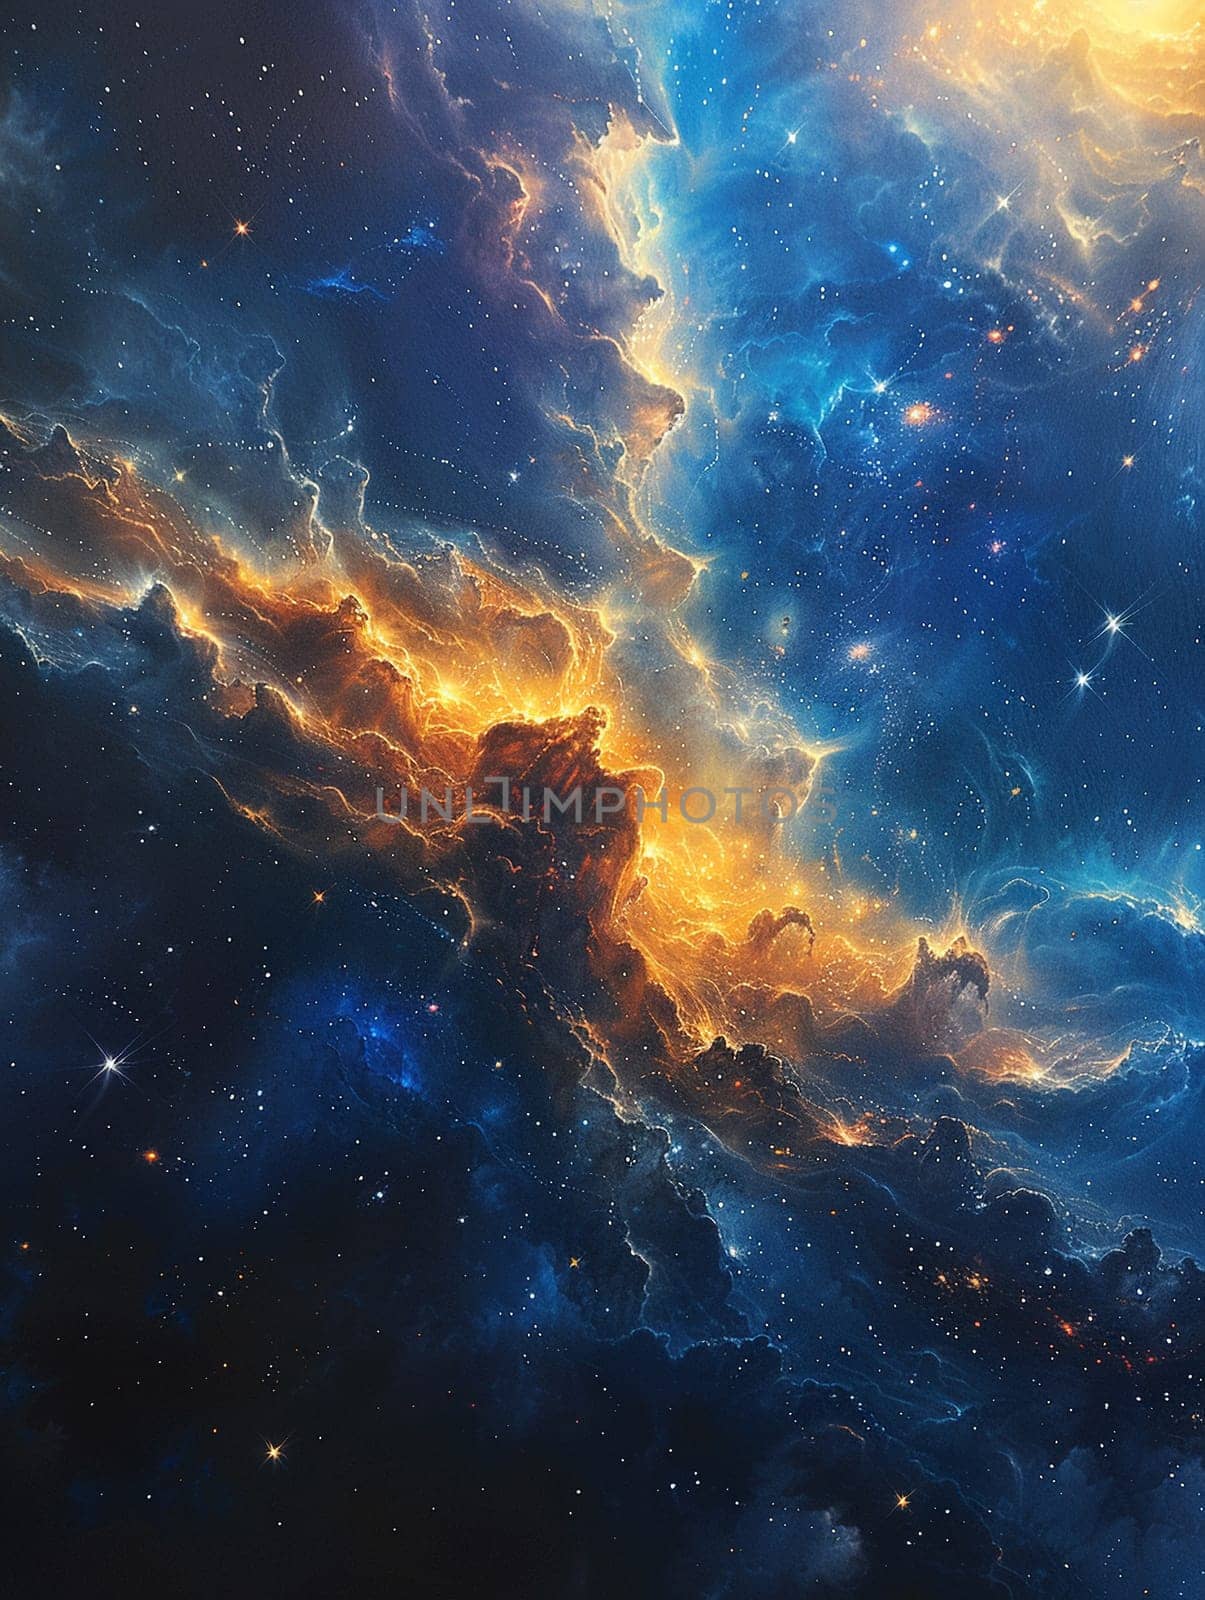 Breathtaking space nebula painted with swirling cosmic dust and stars, in a Hubble telescope art style.